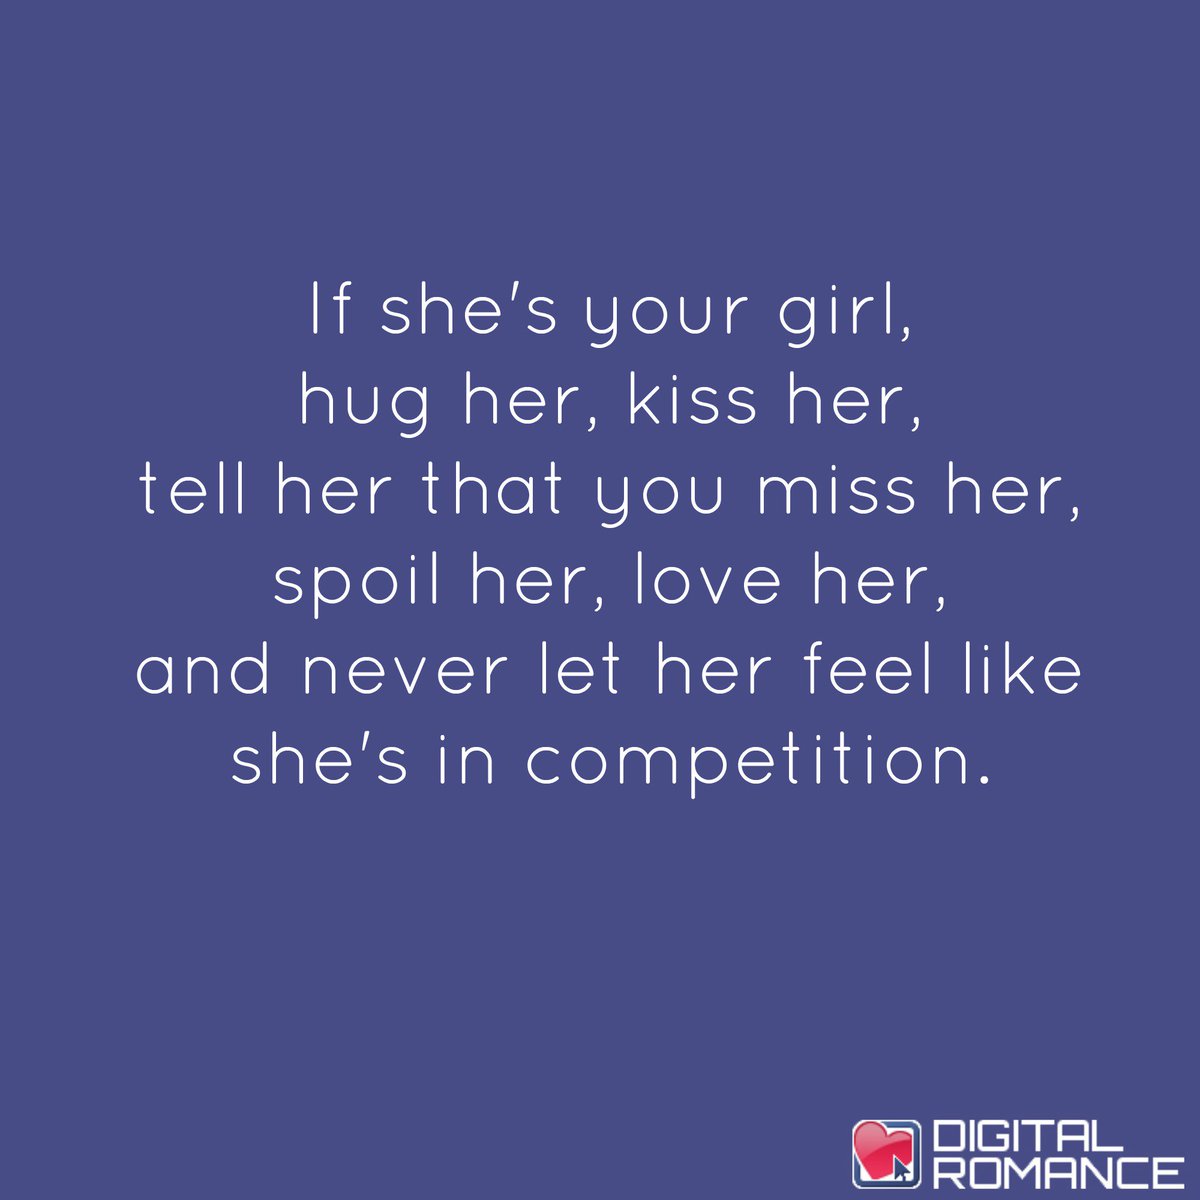 Digital Romance Inc on Twitter "If she s your girl hug her kiss her tell her that you miss her spoil her love her and never let her love quotes